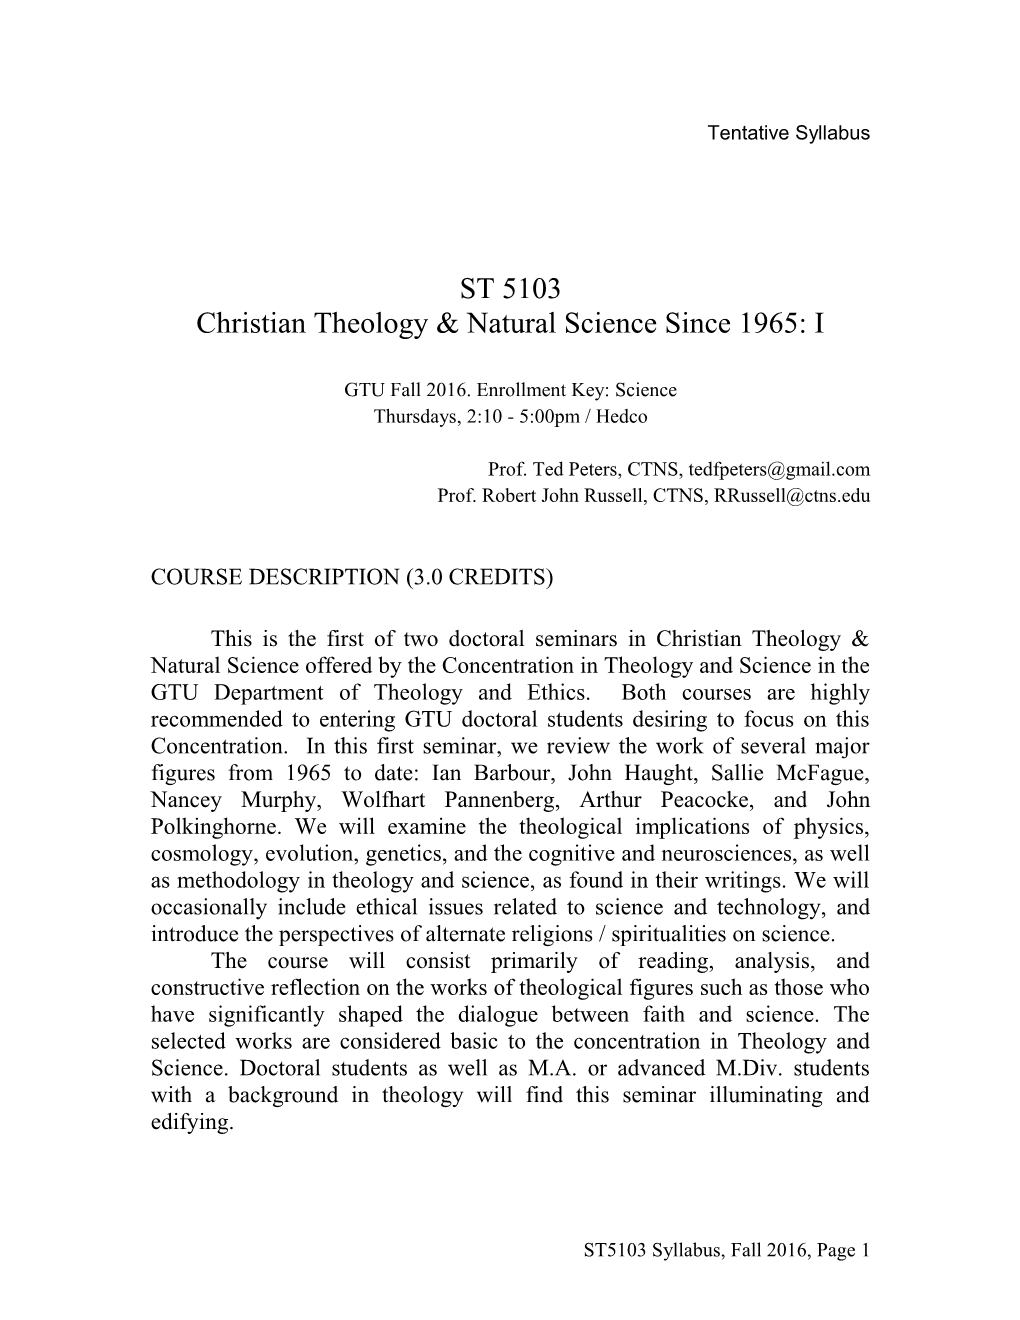 Christian Theology & Natural Science Since 1965: I